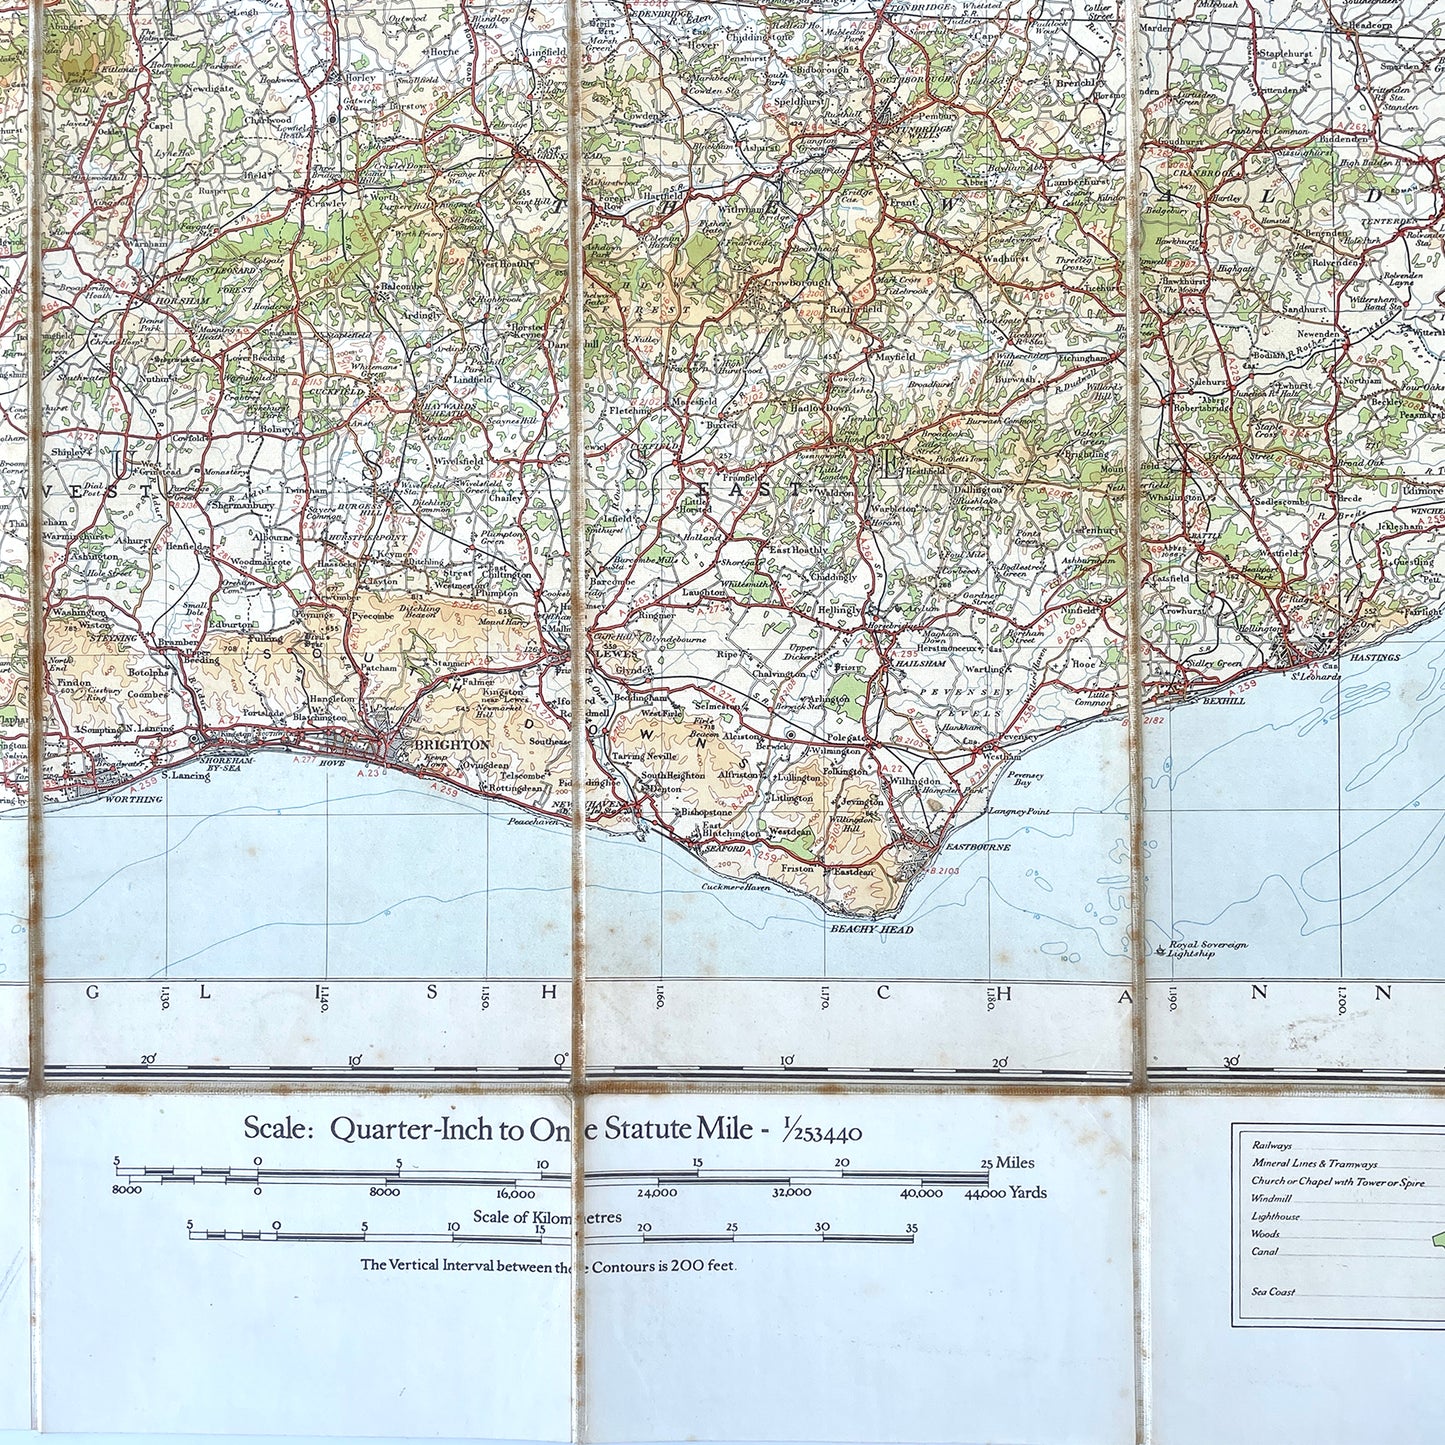 Load image into Gallery viewer, Large 1935 Ordnance Survey Map of the South-East and London - Sukie
